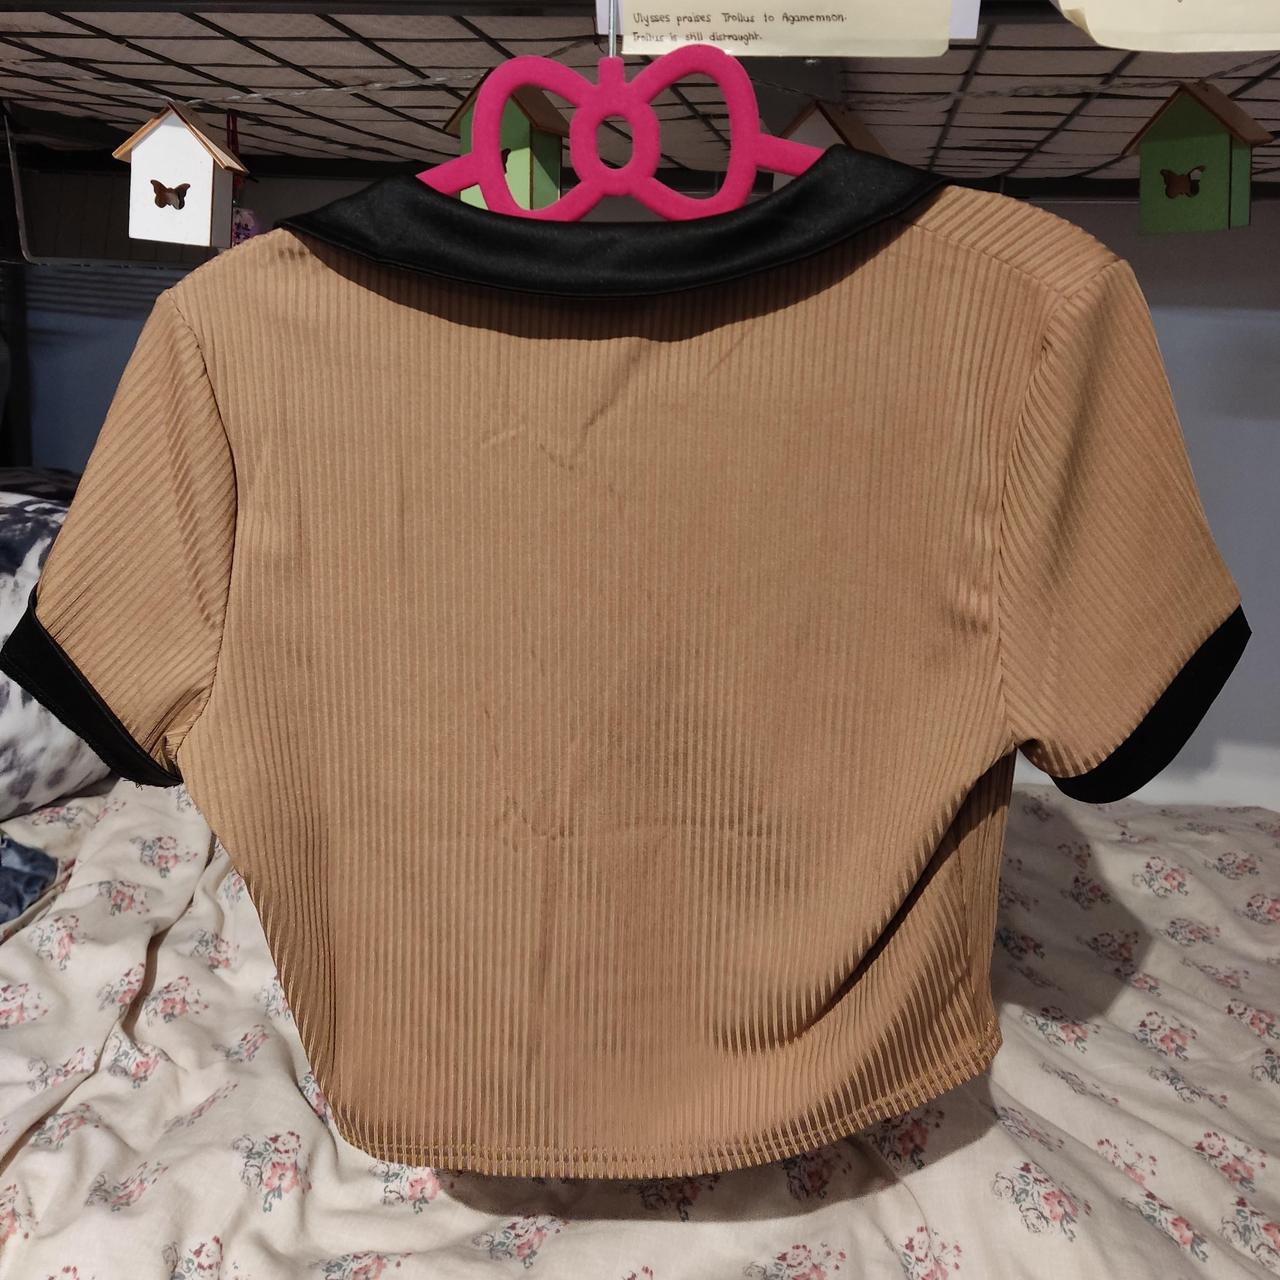 Product Image 2 - Brown ribbed collar t-shirt

-Never worn,